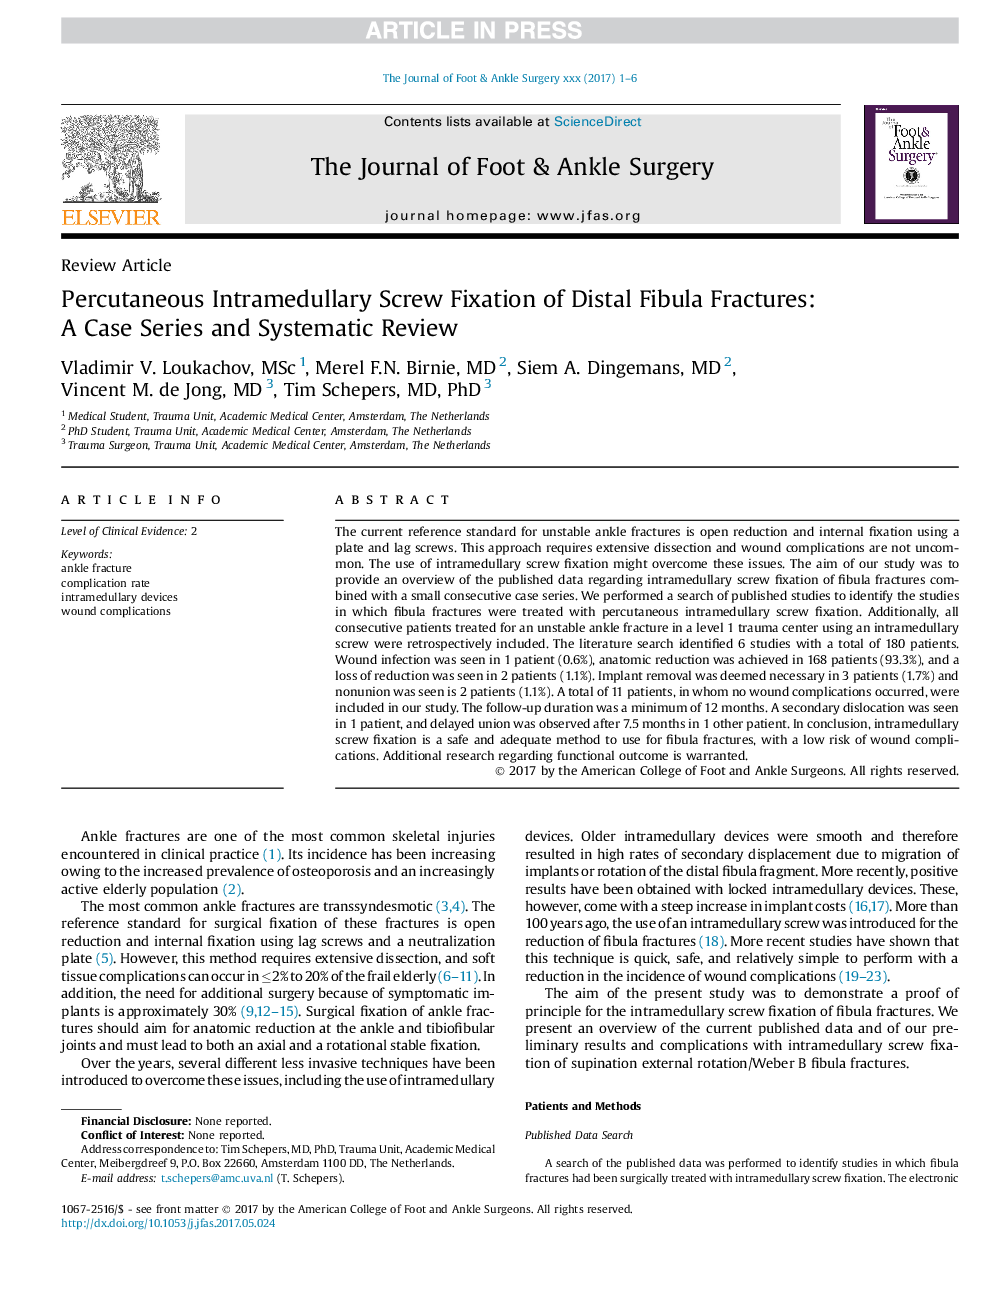 Percutaneous Intramedullary Screw Fixation of Distal Fibula Fractures: A Case Series and Systematic Review